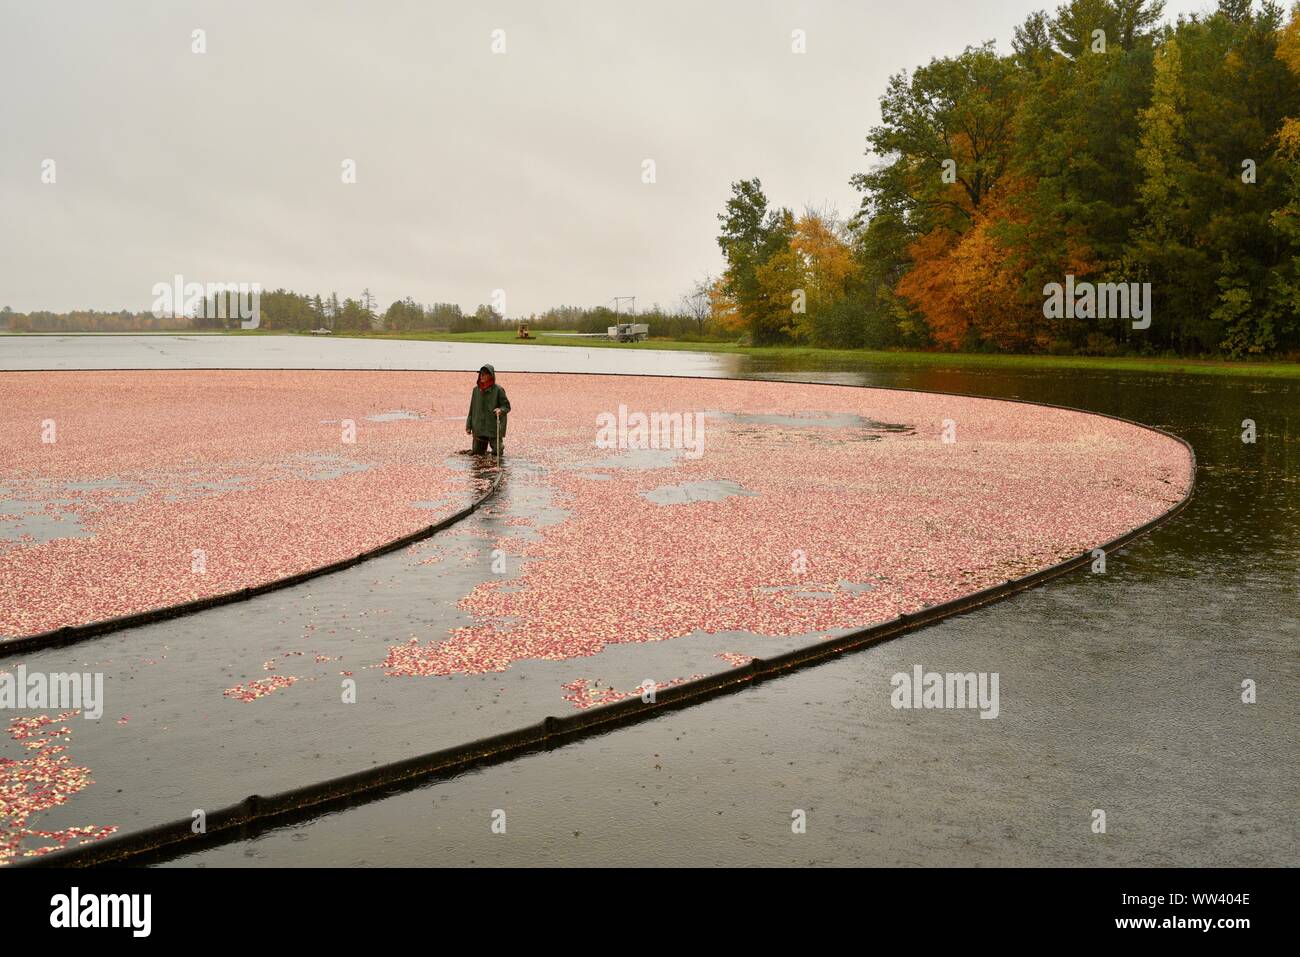 Farmers in rain jackets harvesting red cranberries floating on surface, during rain showers, in fall, on farm outside Wisconsin Rapids, Wisconsin, USA Stock Photo